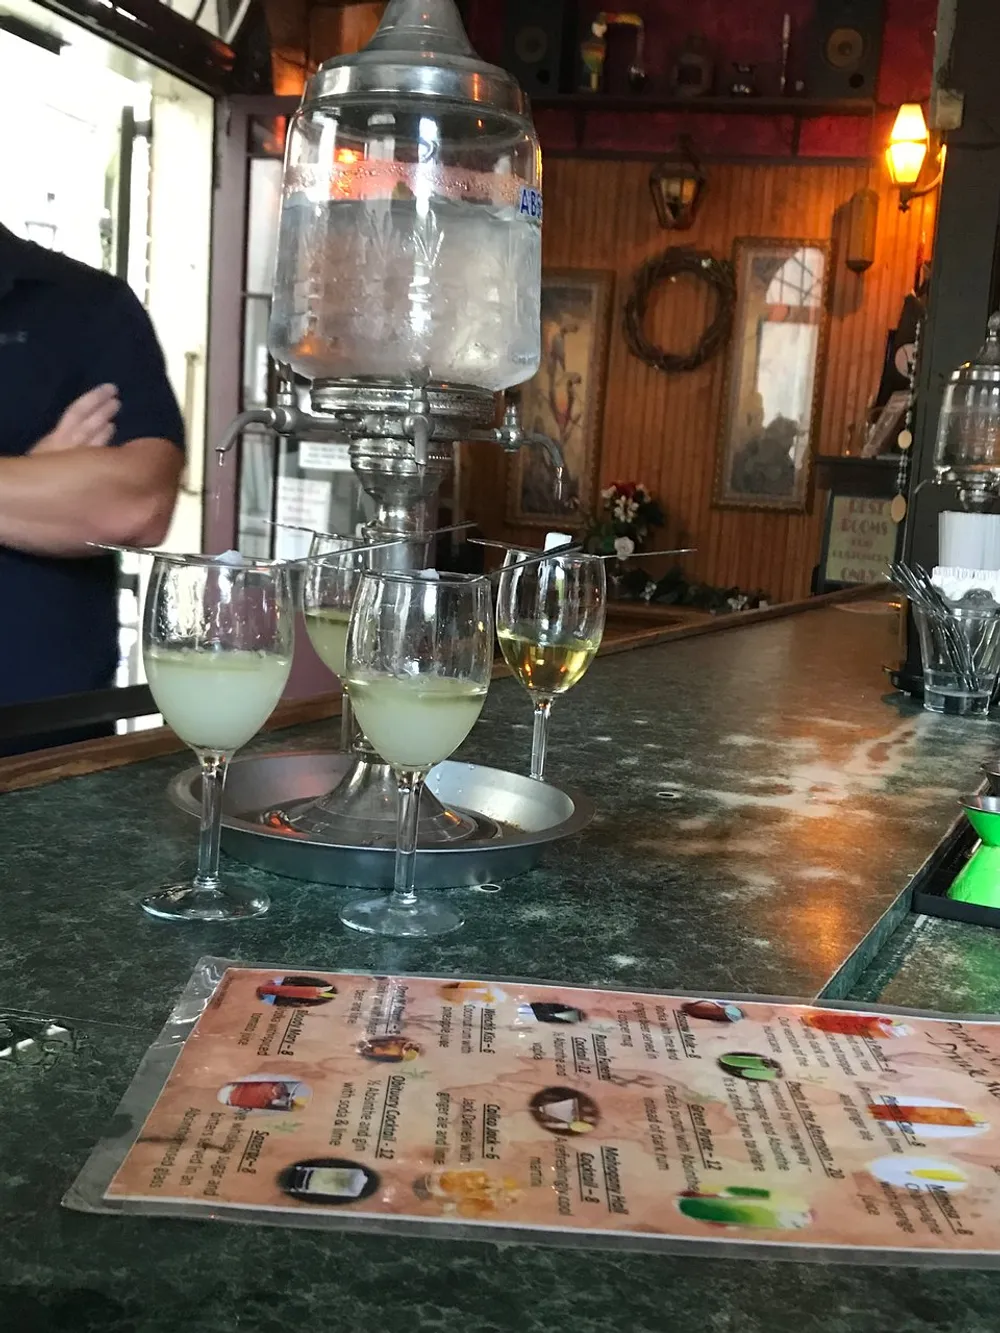 The image shows a bar scene with a drinks menu in the foreground glasses of beverages on the counter and a person standing behind the bar partially cropped out